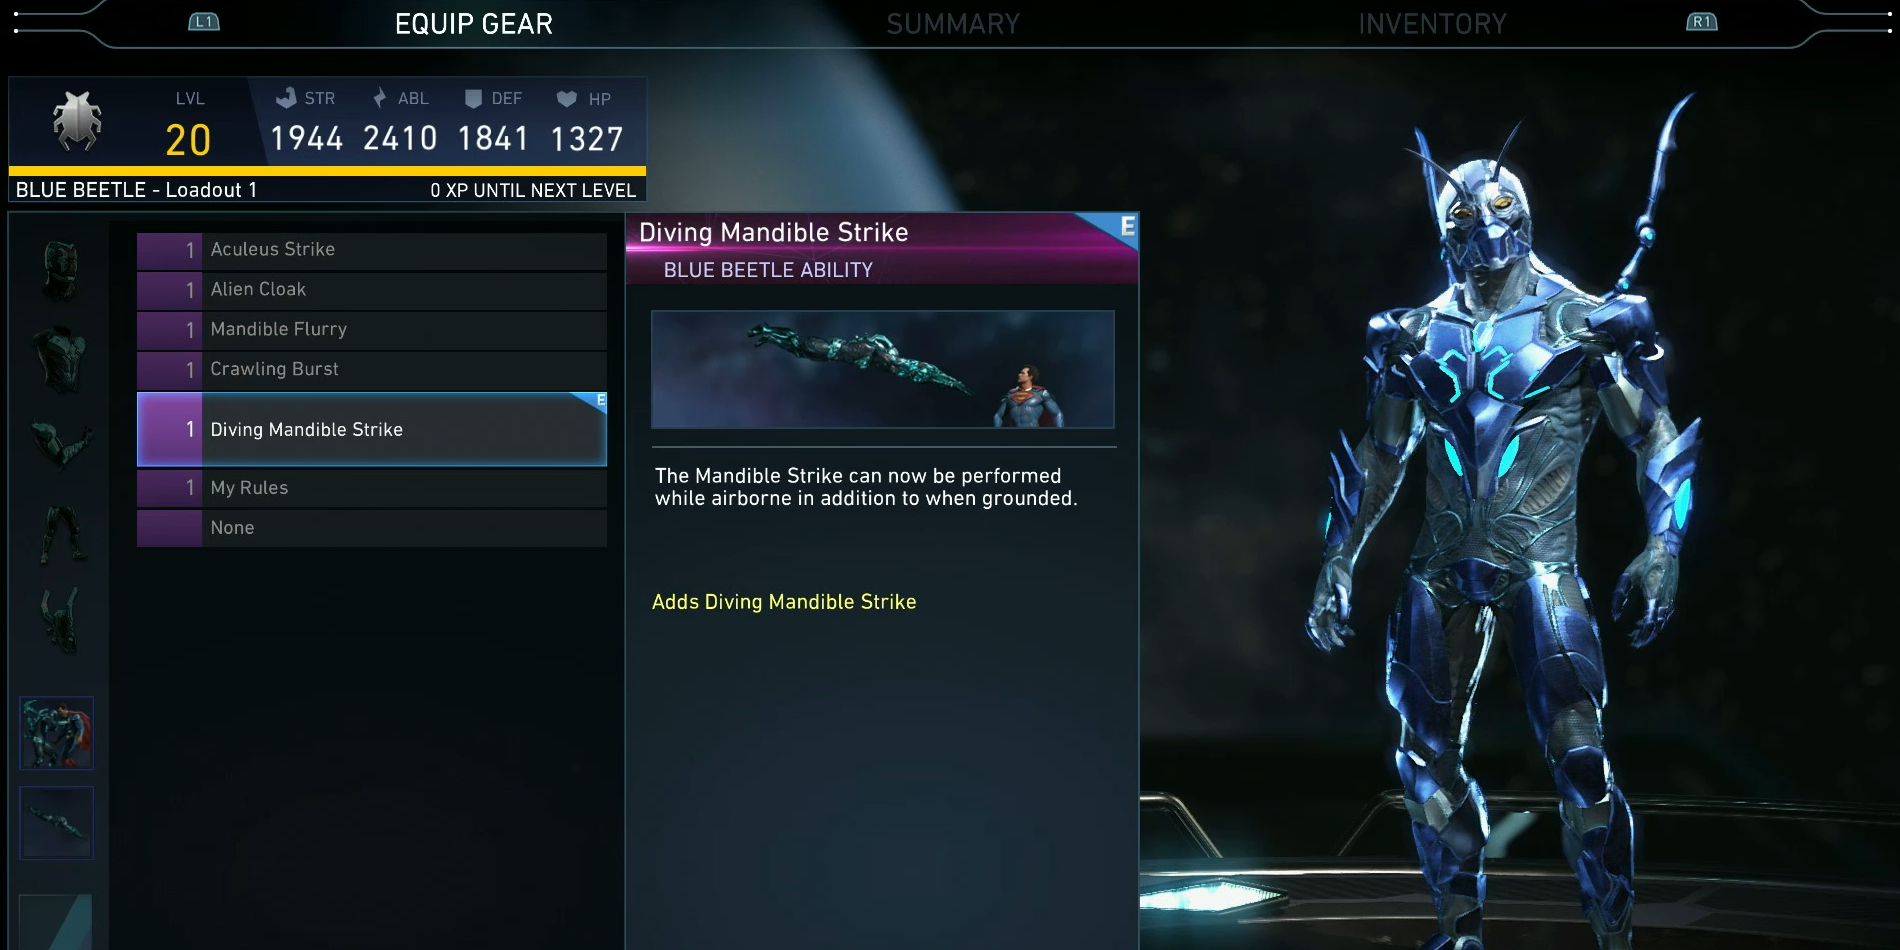 Blue Beetle's abilities in Injustice 2